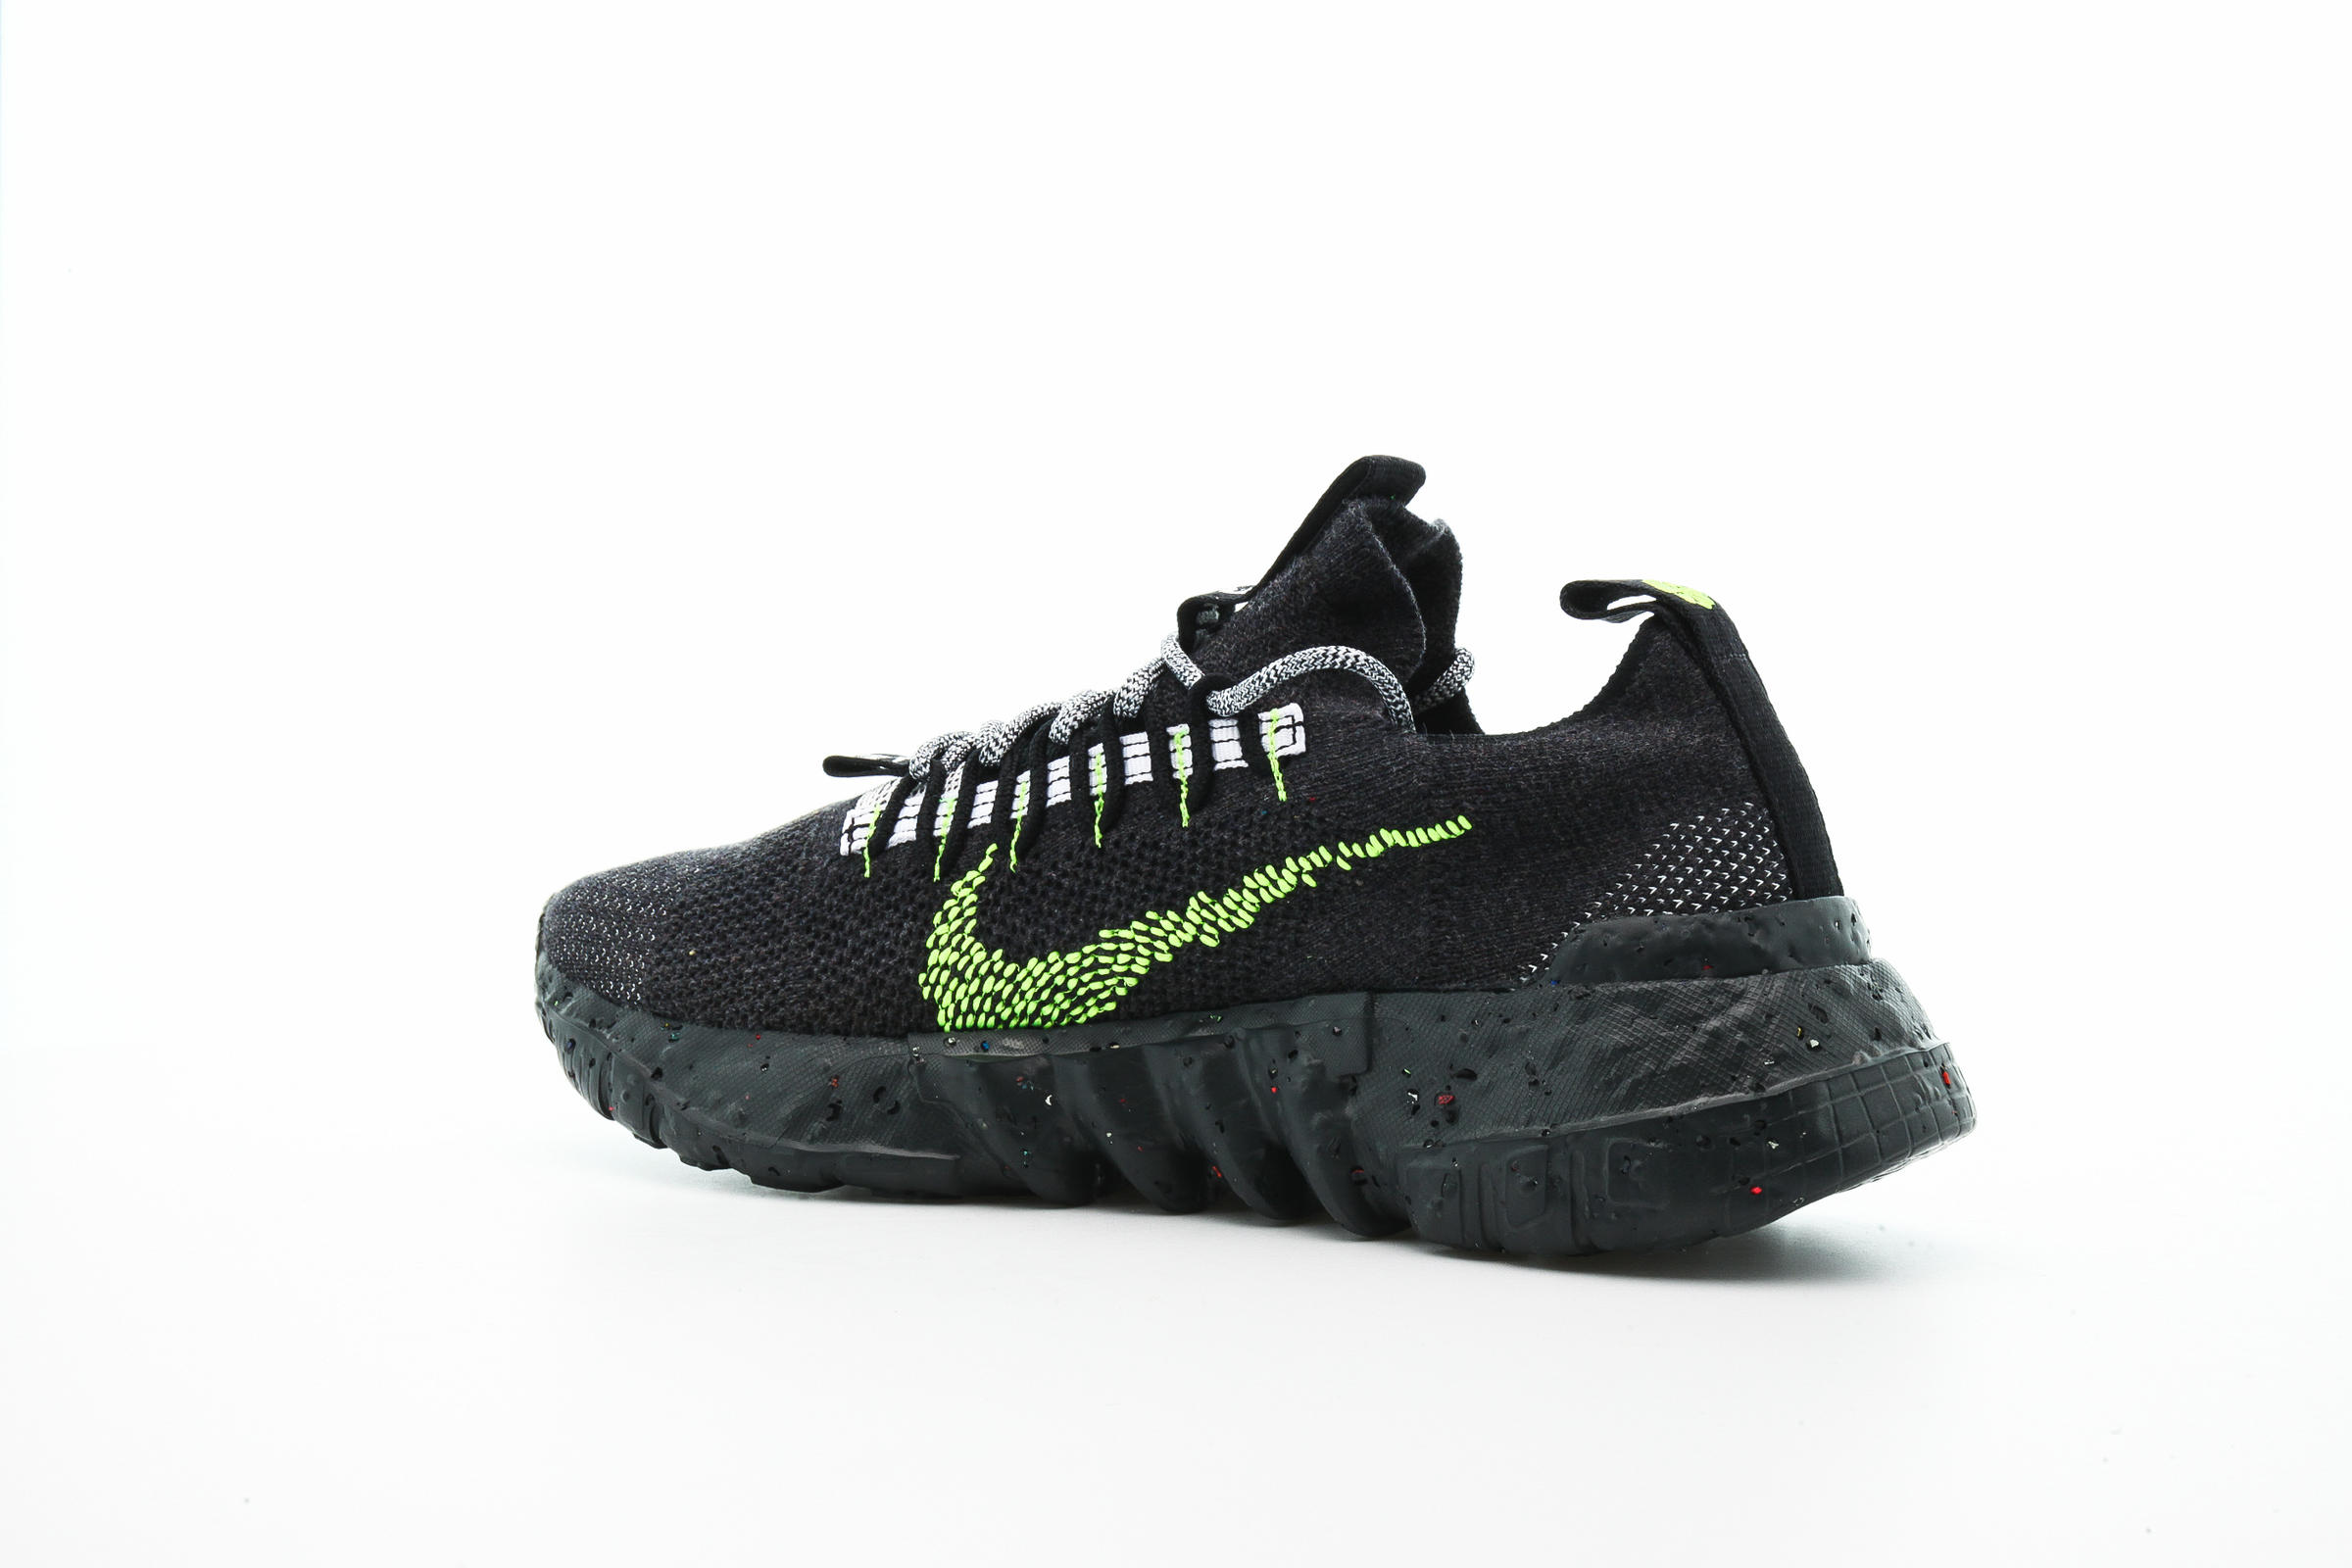 Nike SPACE HIPPIE 01 "ANTHRACITE"